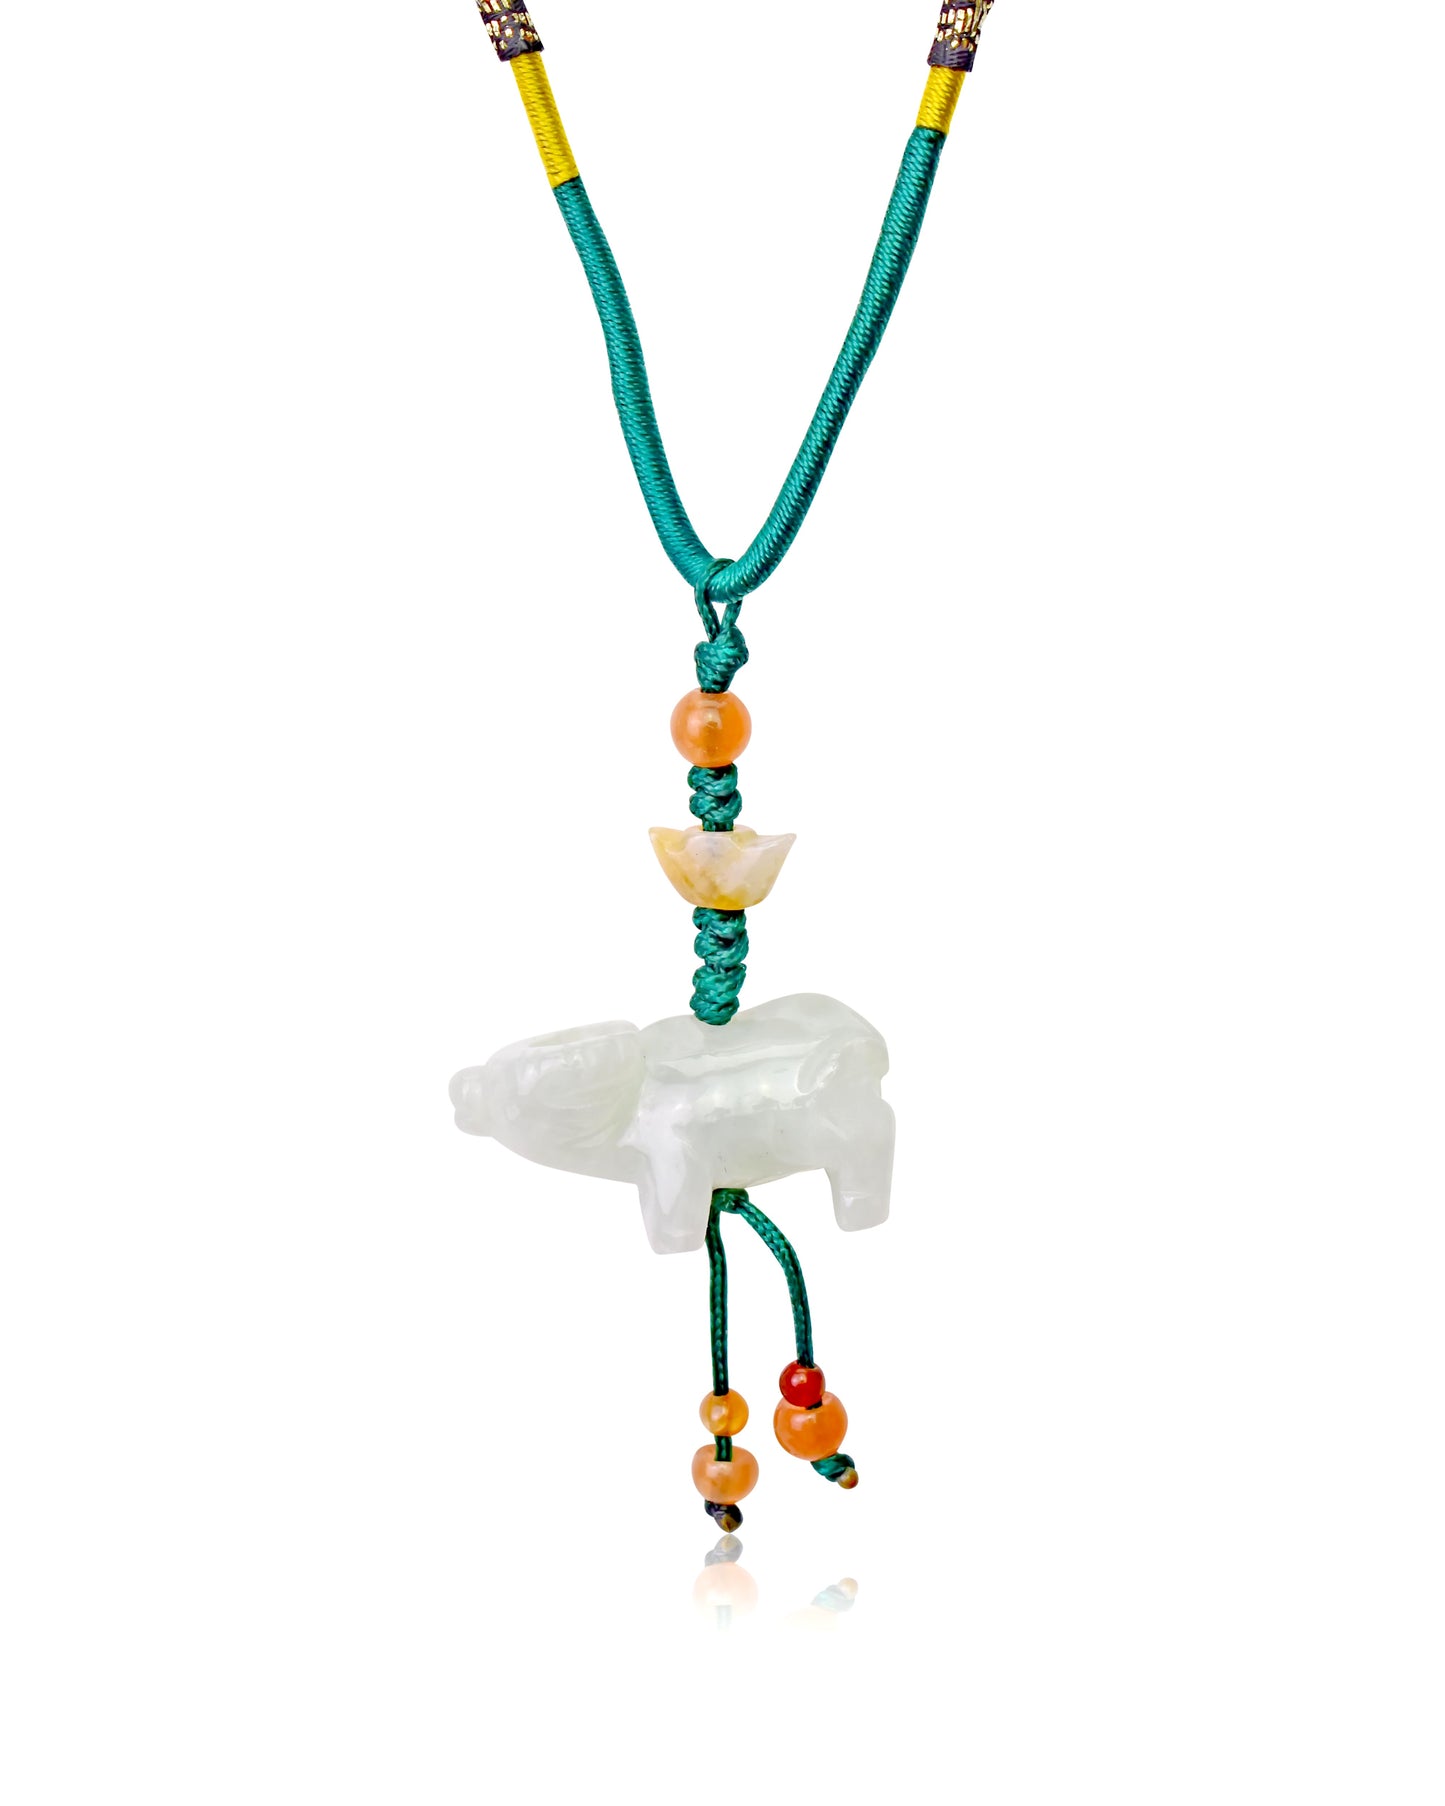 Wear Your Ox Zodiac Sign in Style with a Handmade Jade Necklace made with Green Cord